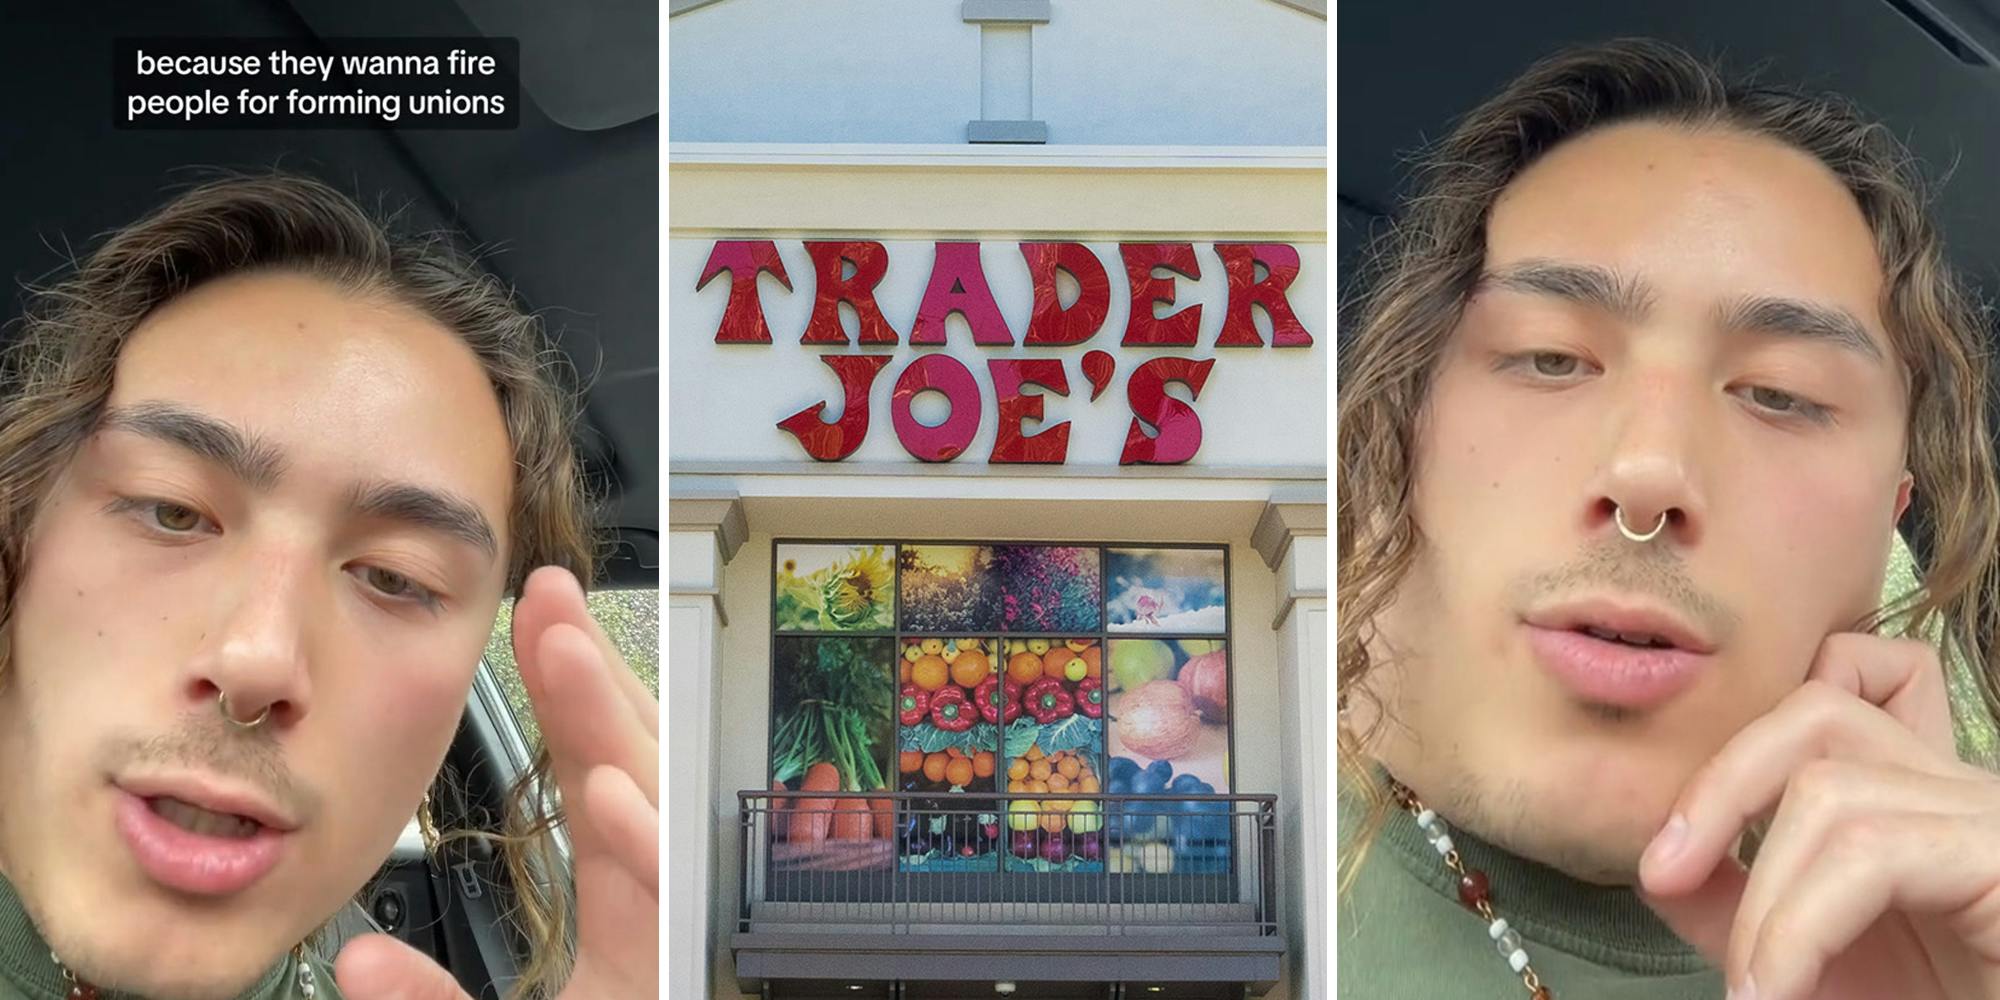 Man says Trader Joe's is 'joining' forces with Elon Musk, Jeff Bezos to make unions unconstitutional